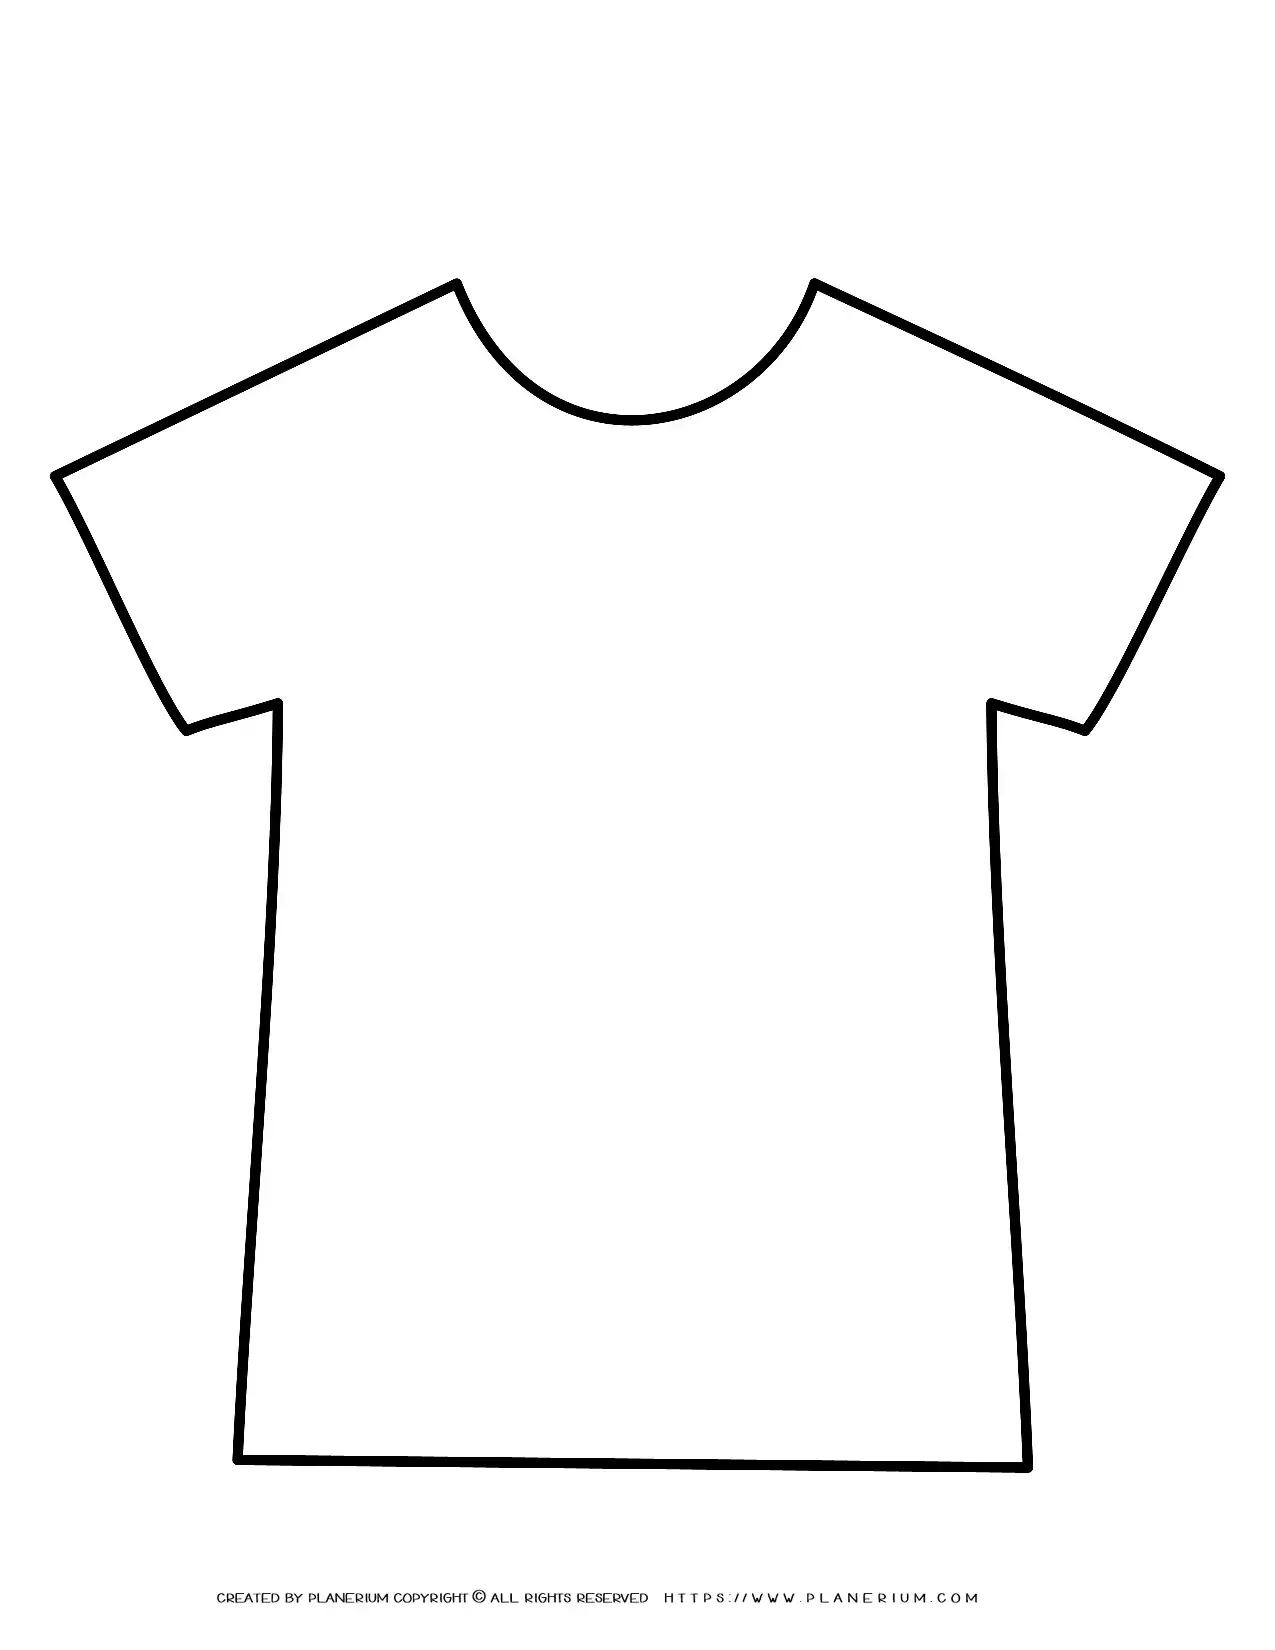 Encourage Creativity and Learning with a Printable T-shirt Outline Template